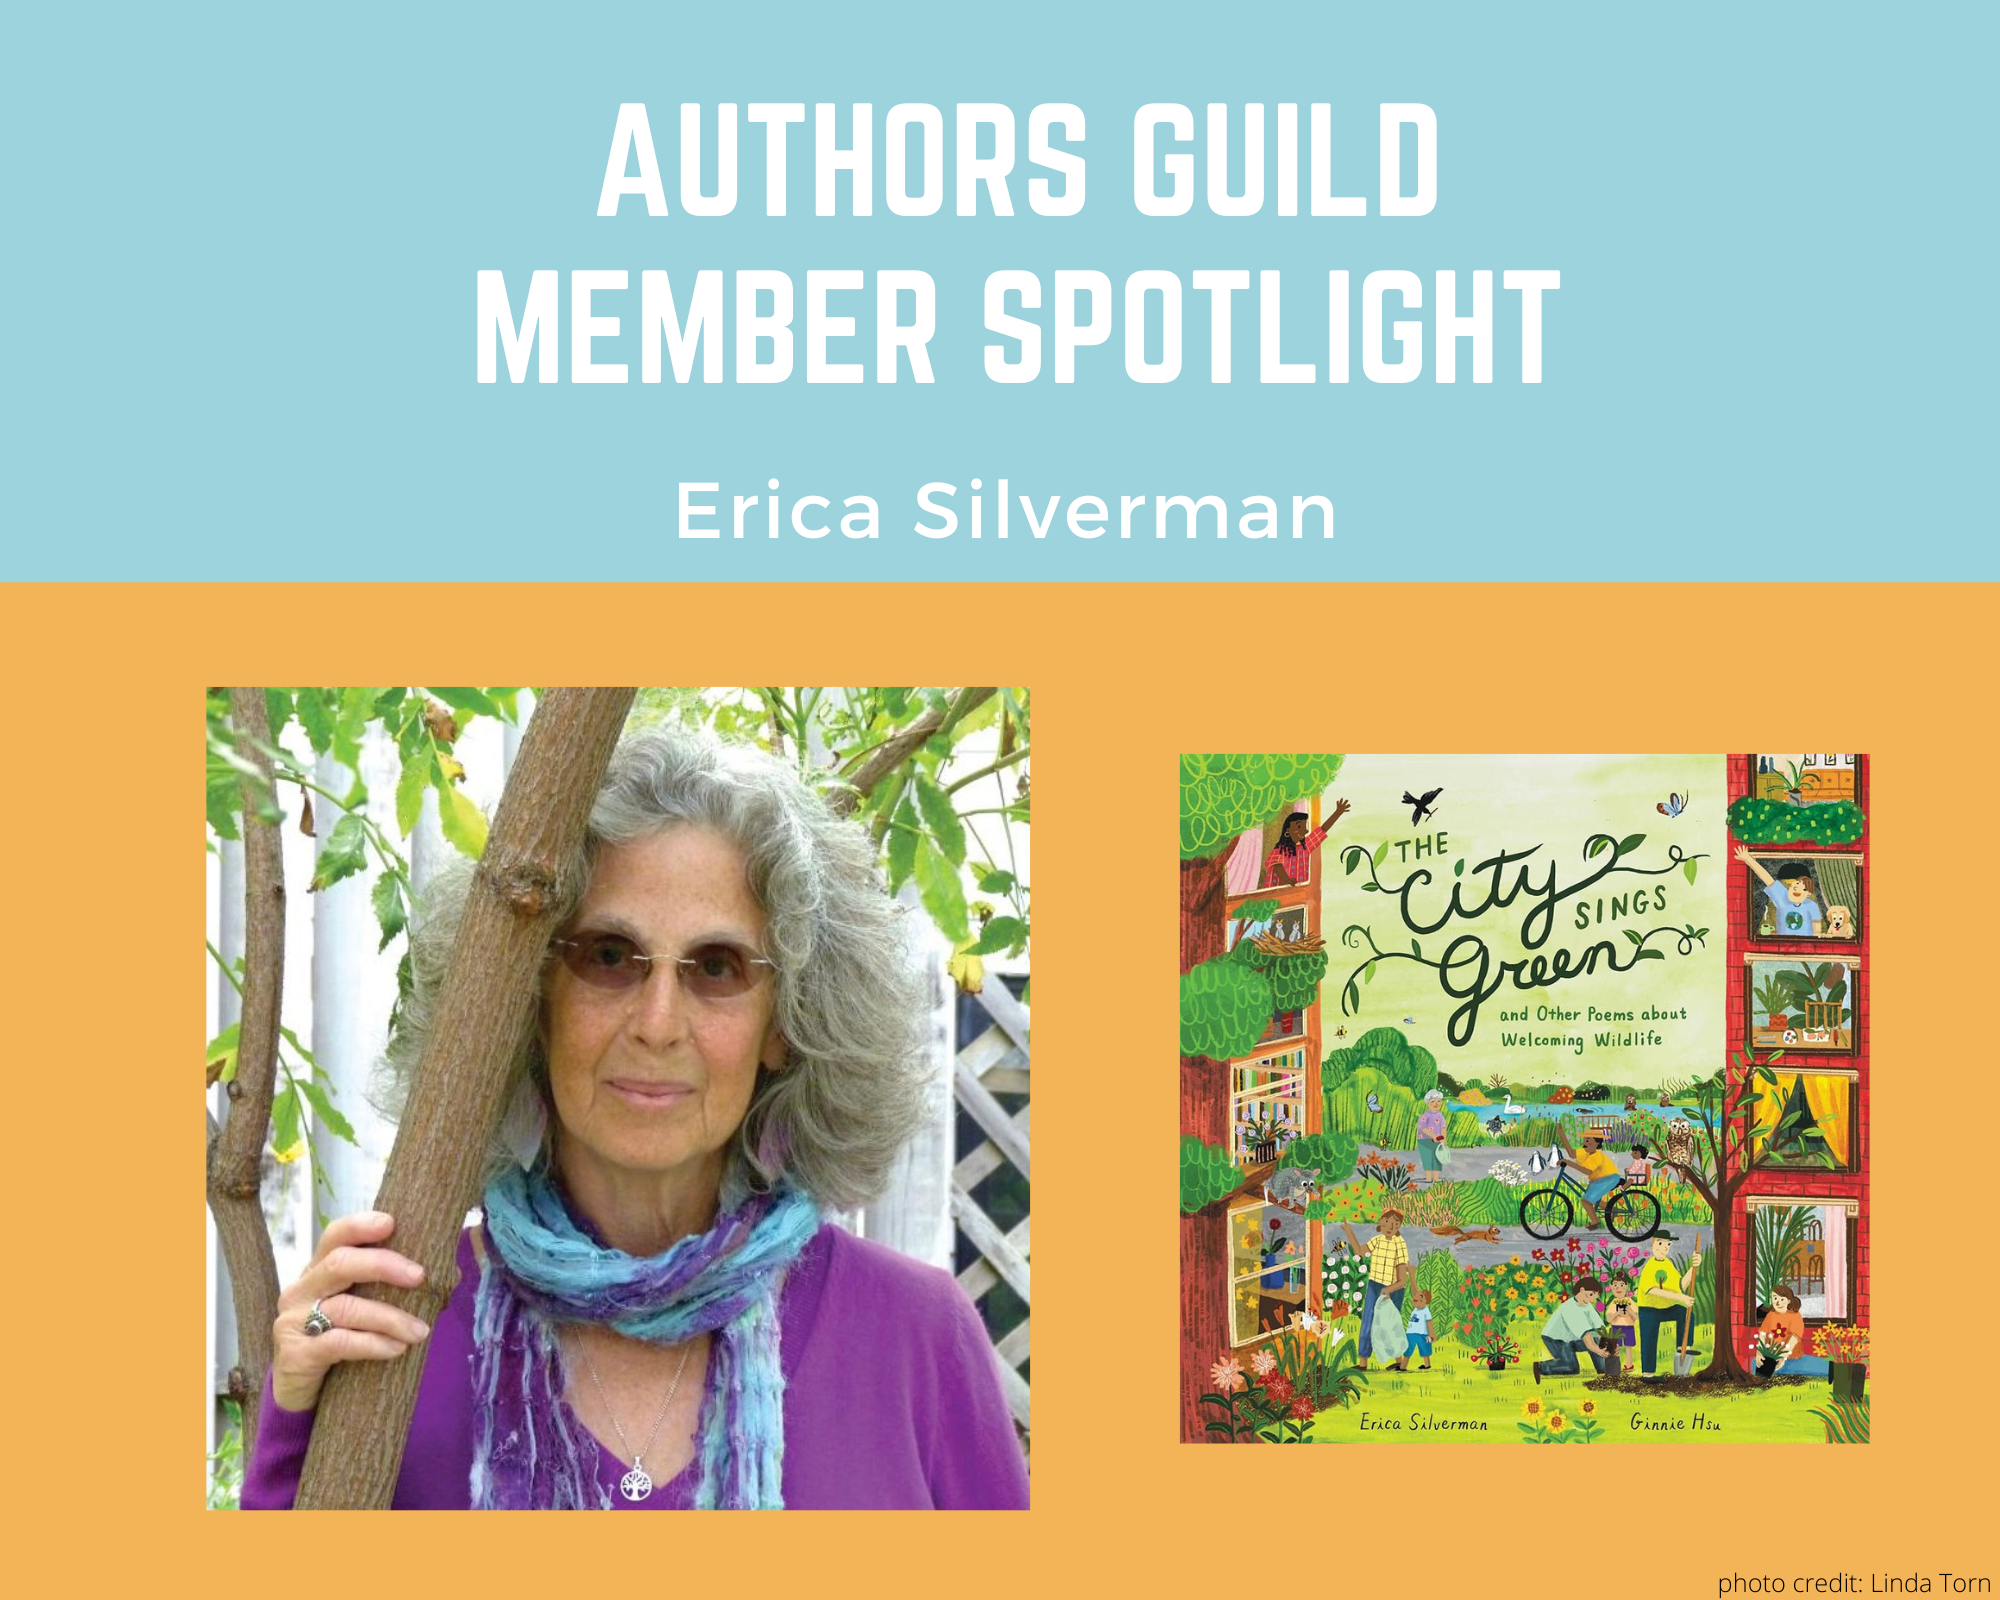 author Erica Silverman and her book The City Sings Green